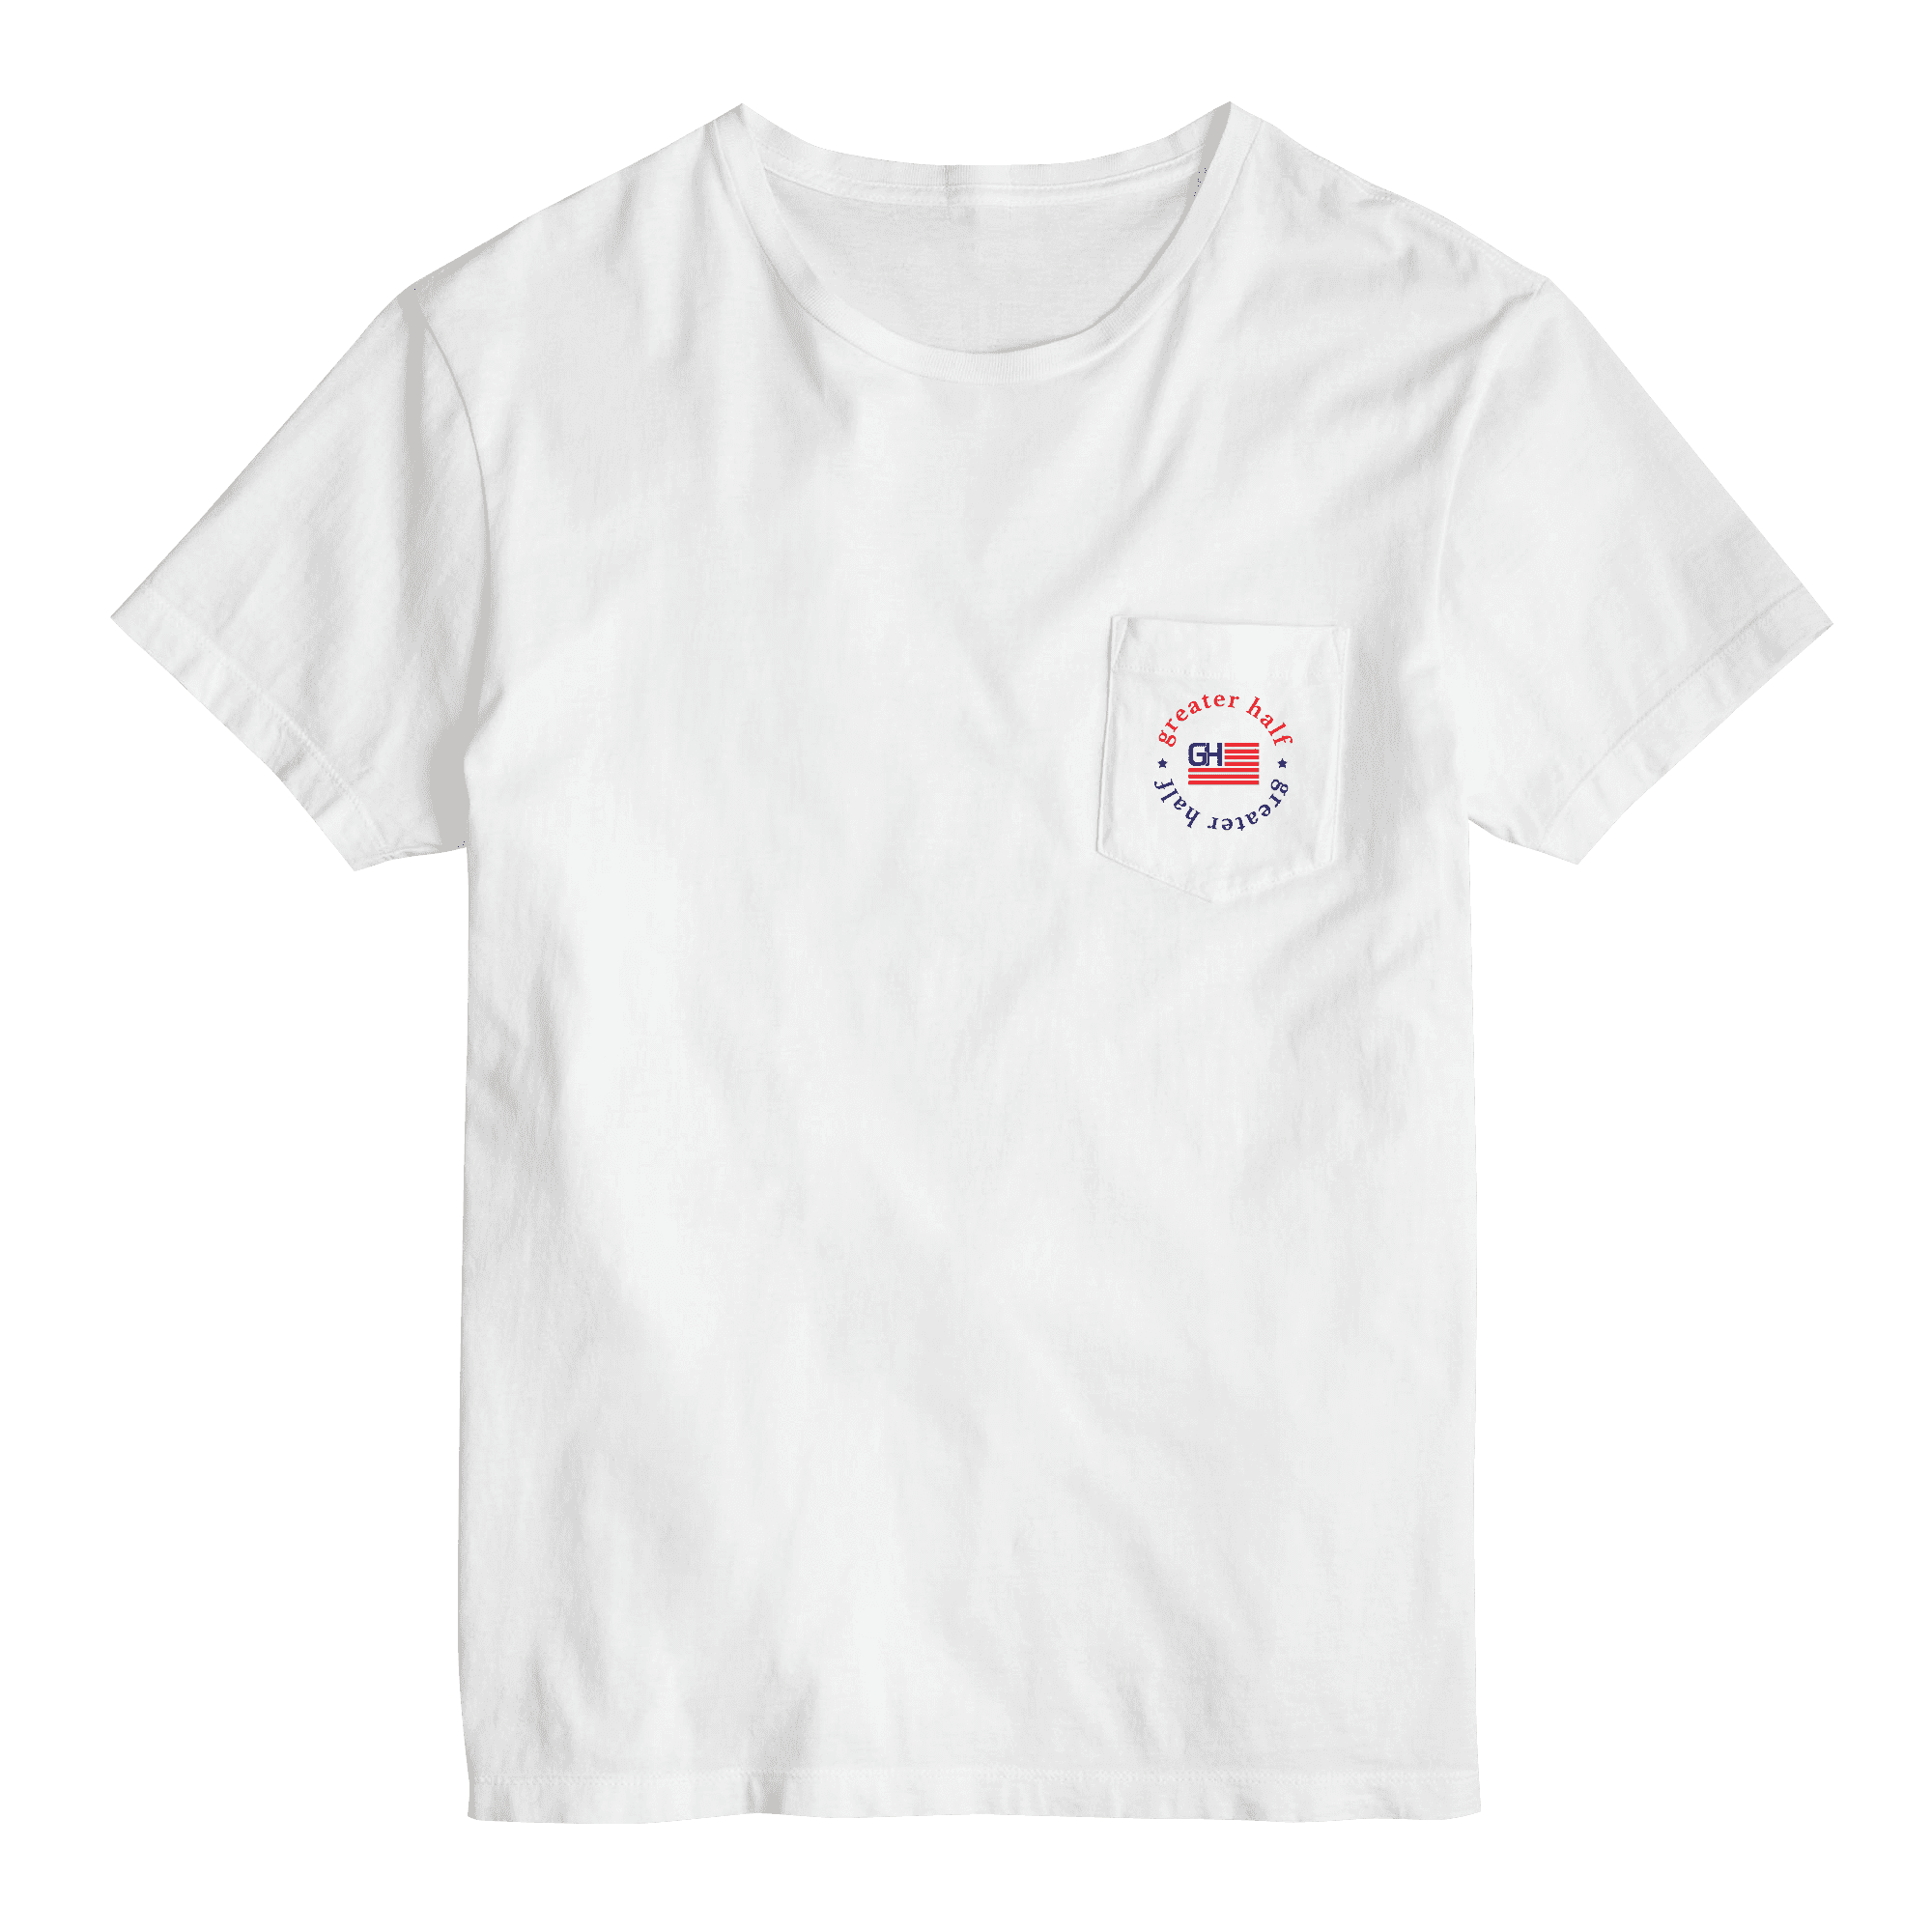 Thumbnail for Greater Half Vintage United Logo T-Shirt - Greater Half